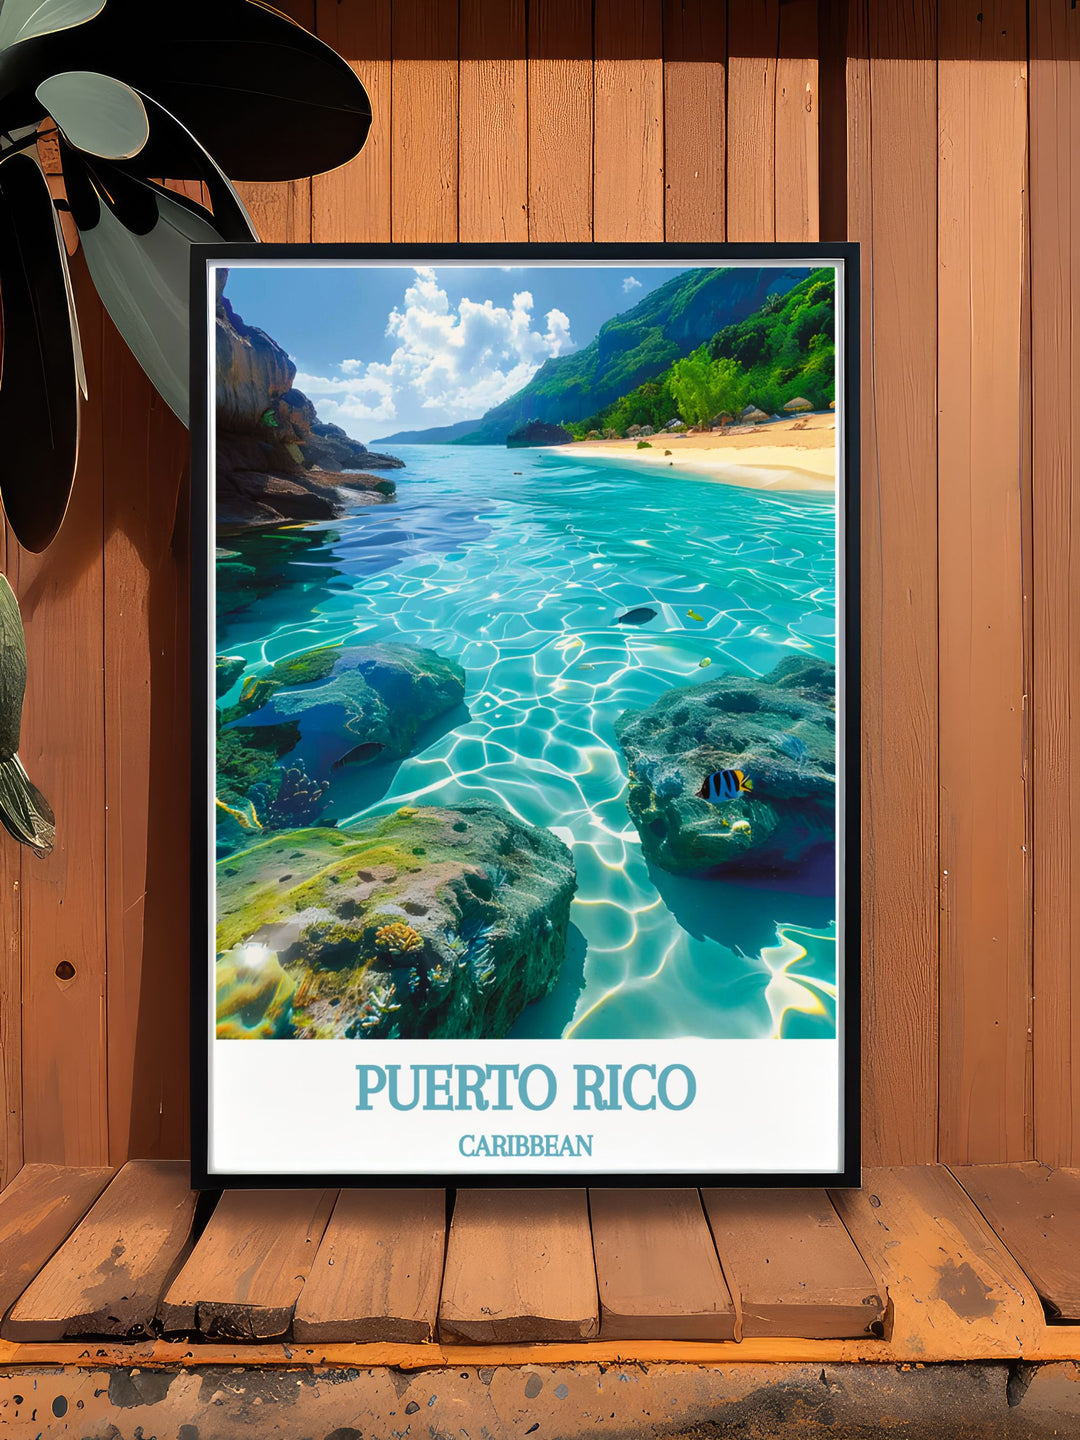 Elegant CARIBBEAN, Culebra and Vieques Biosphere Reserve poster with a vintage design. Ideal for Arecibo photography lovers and those looking for personalized gifts. Adds a vibrant touch to home decor with its striking color palette.